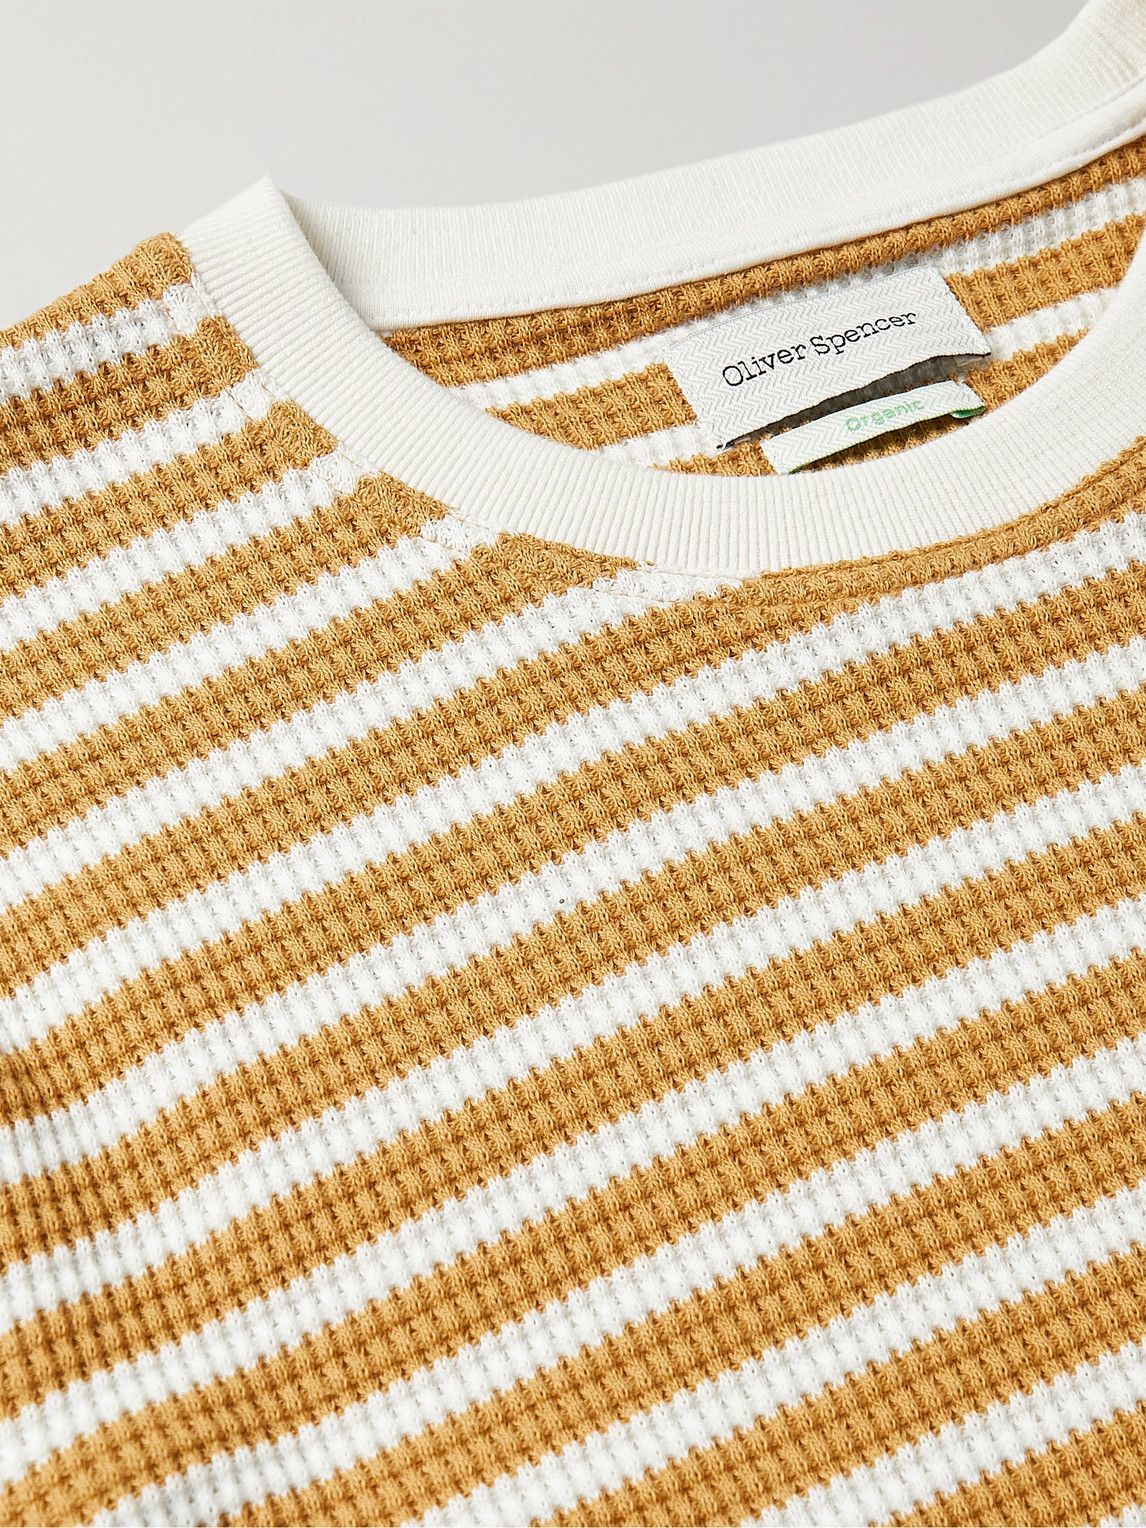 Oliver Spencer - Striped Waffle-Knit Organic Cotton-Blend T-Shirt - Yellow